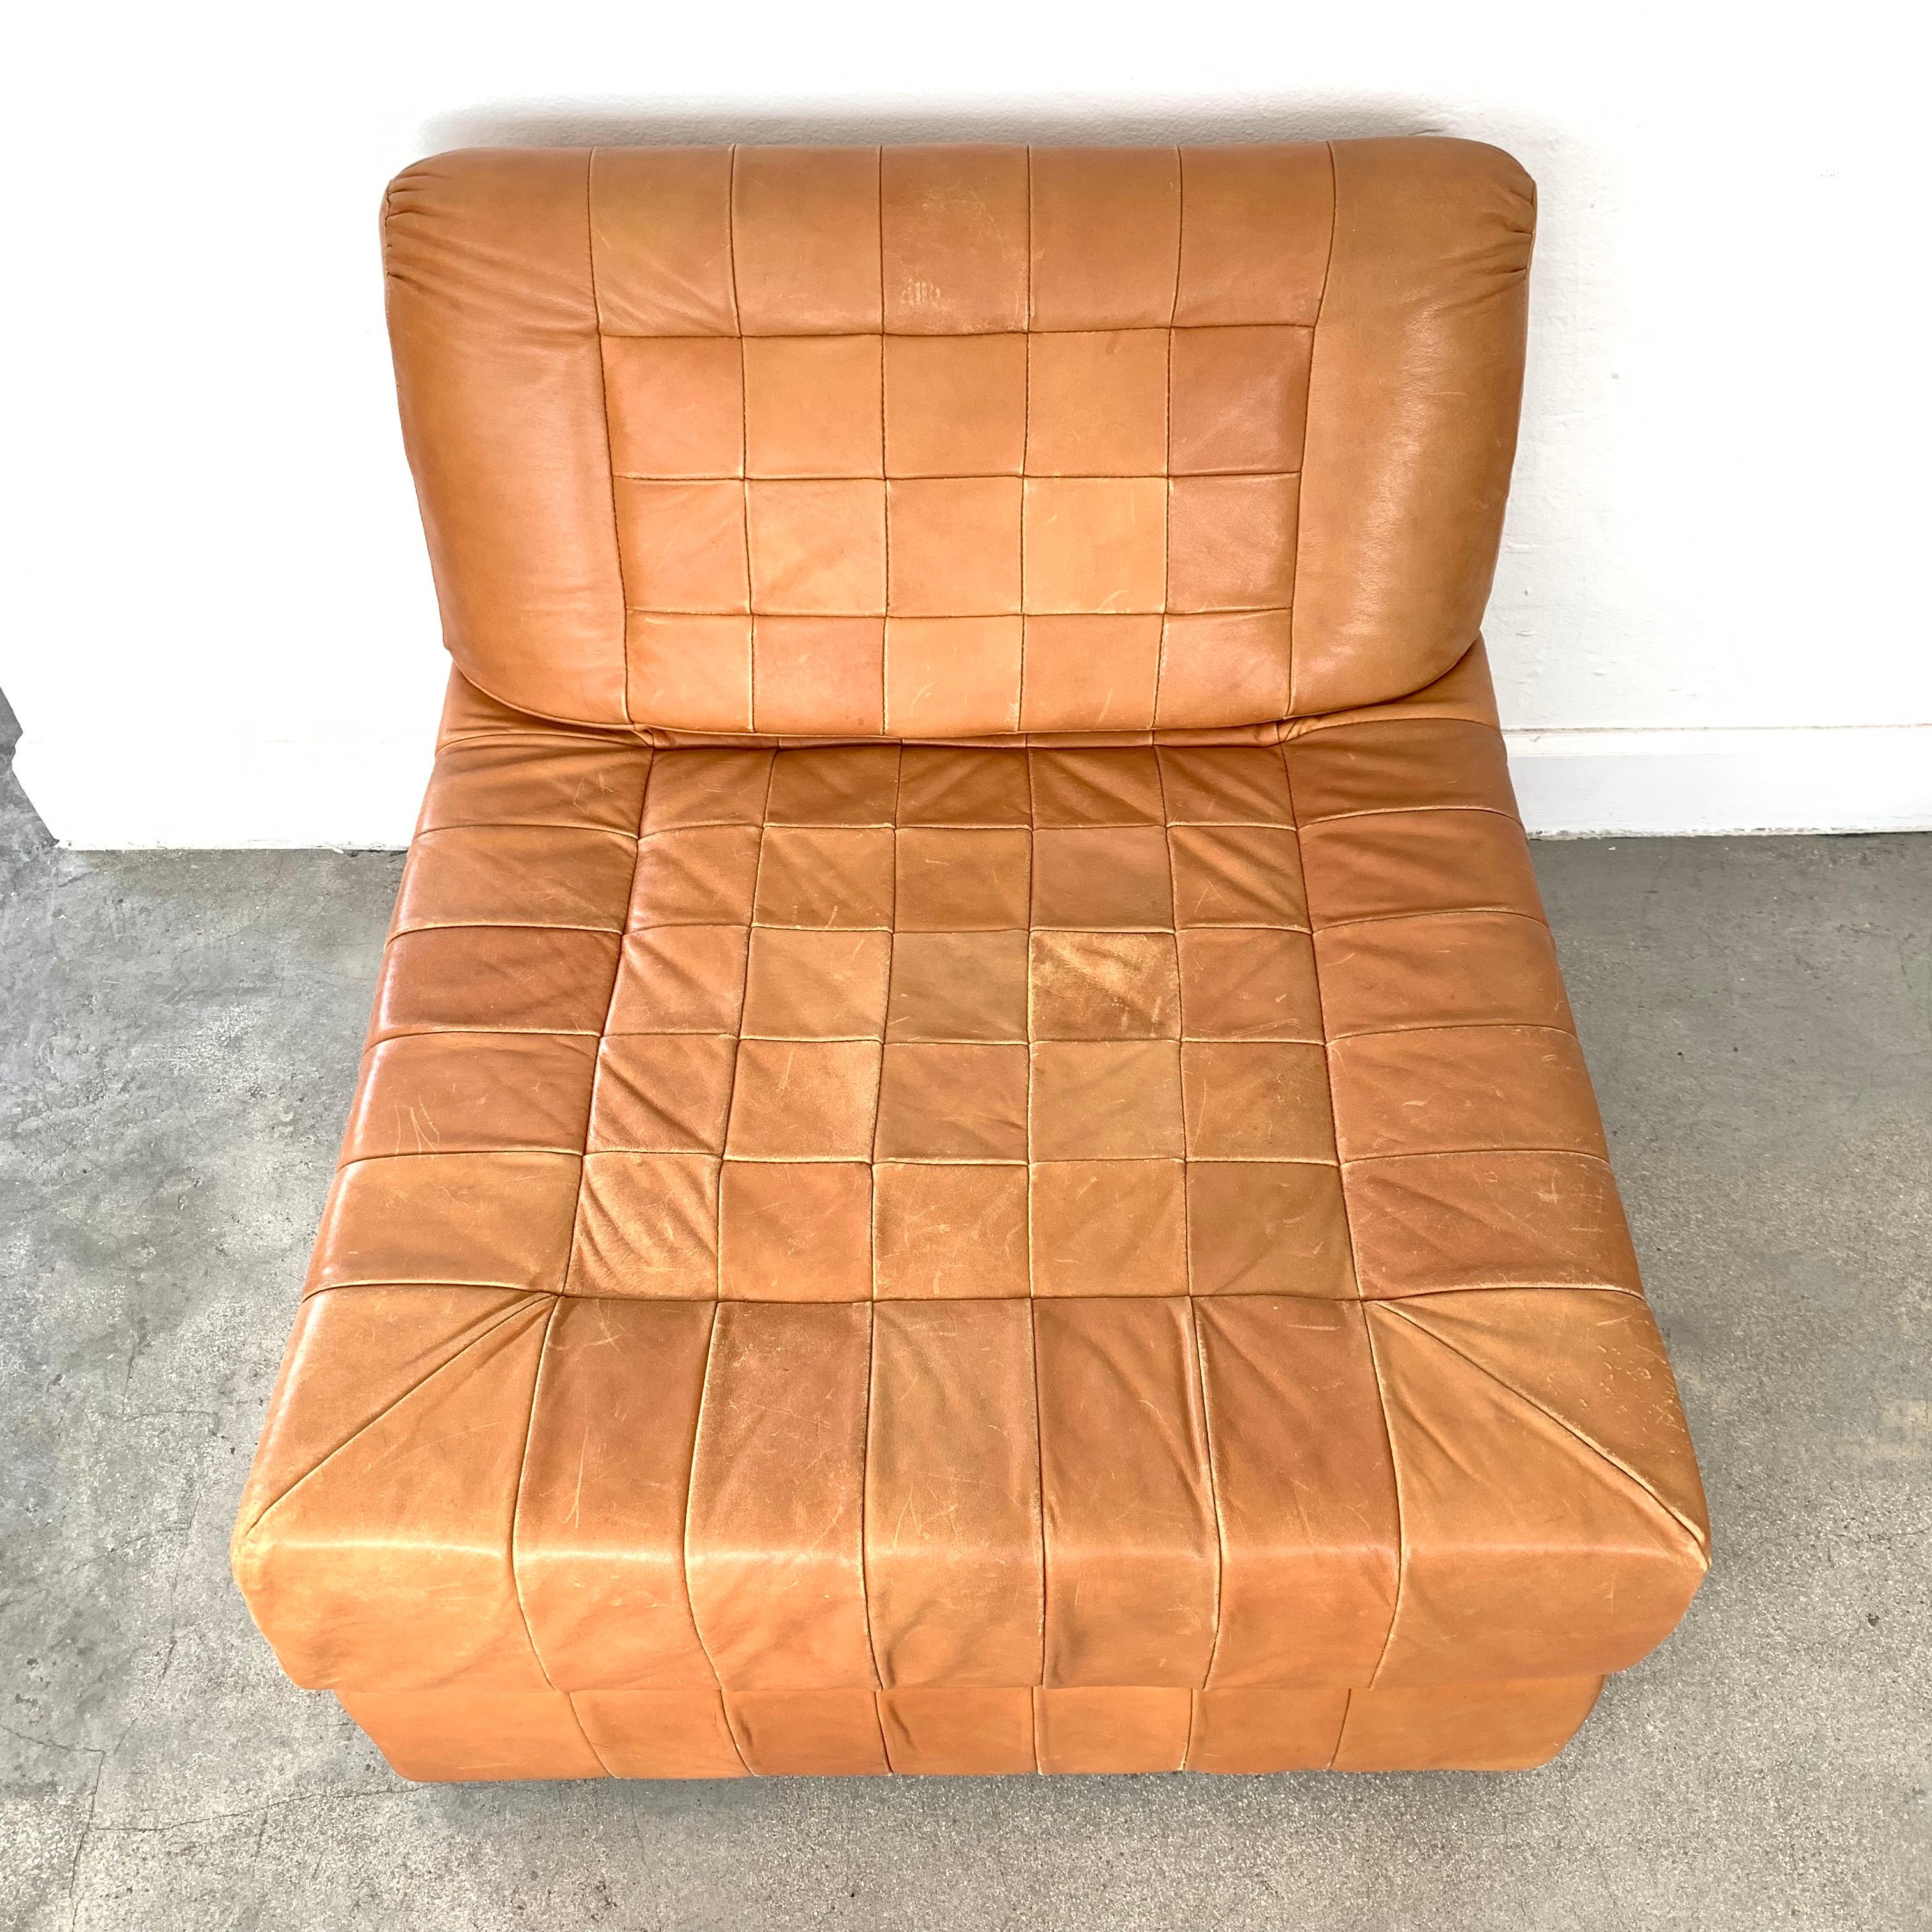 20th Century Percival Lafer Patchwork Leather Chair or Ottoman